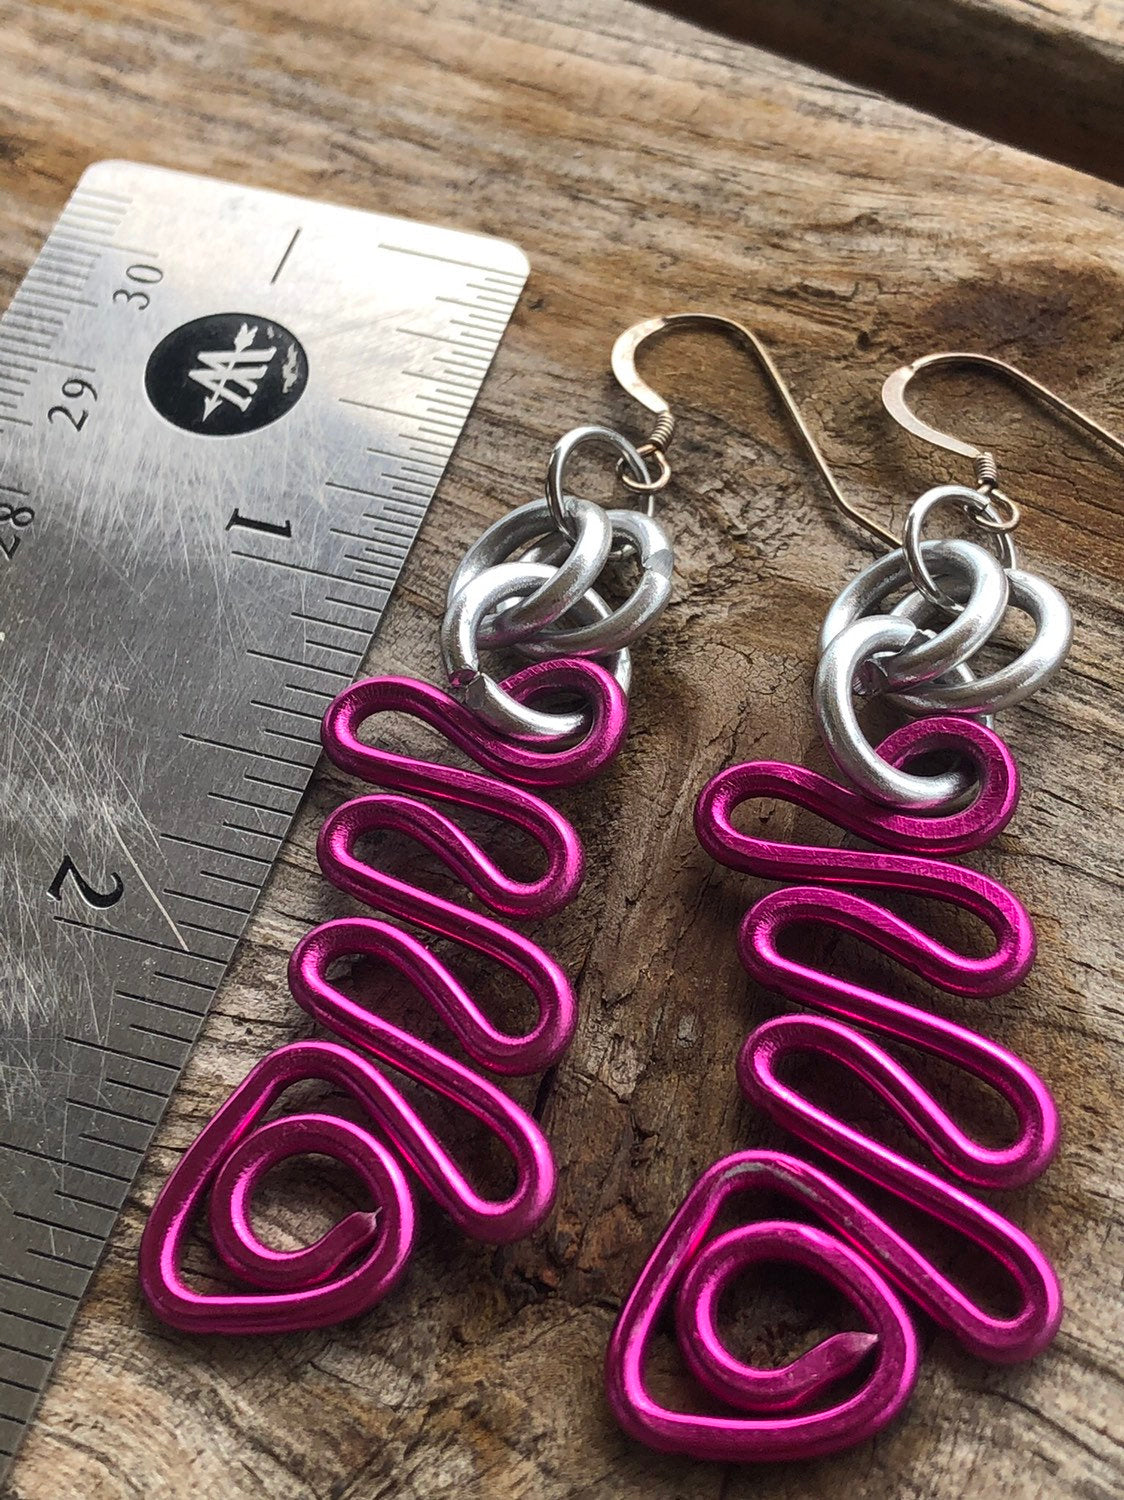 Small Pink zig zag earrings with silver accents and sterling silver ear wire